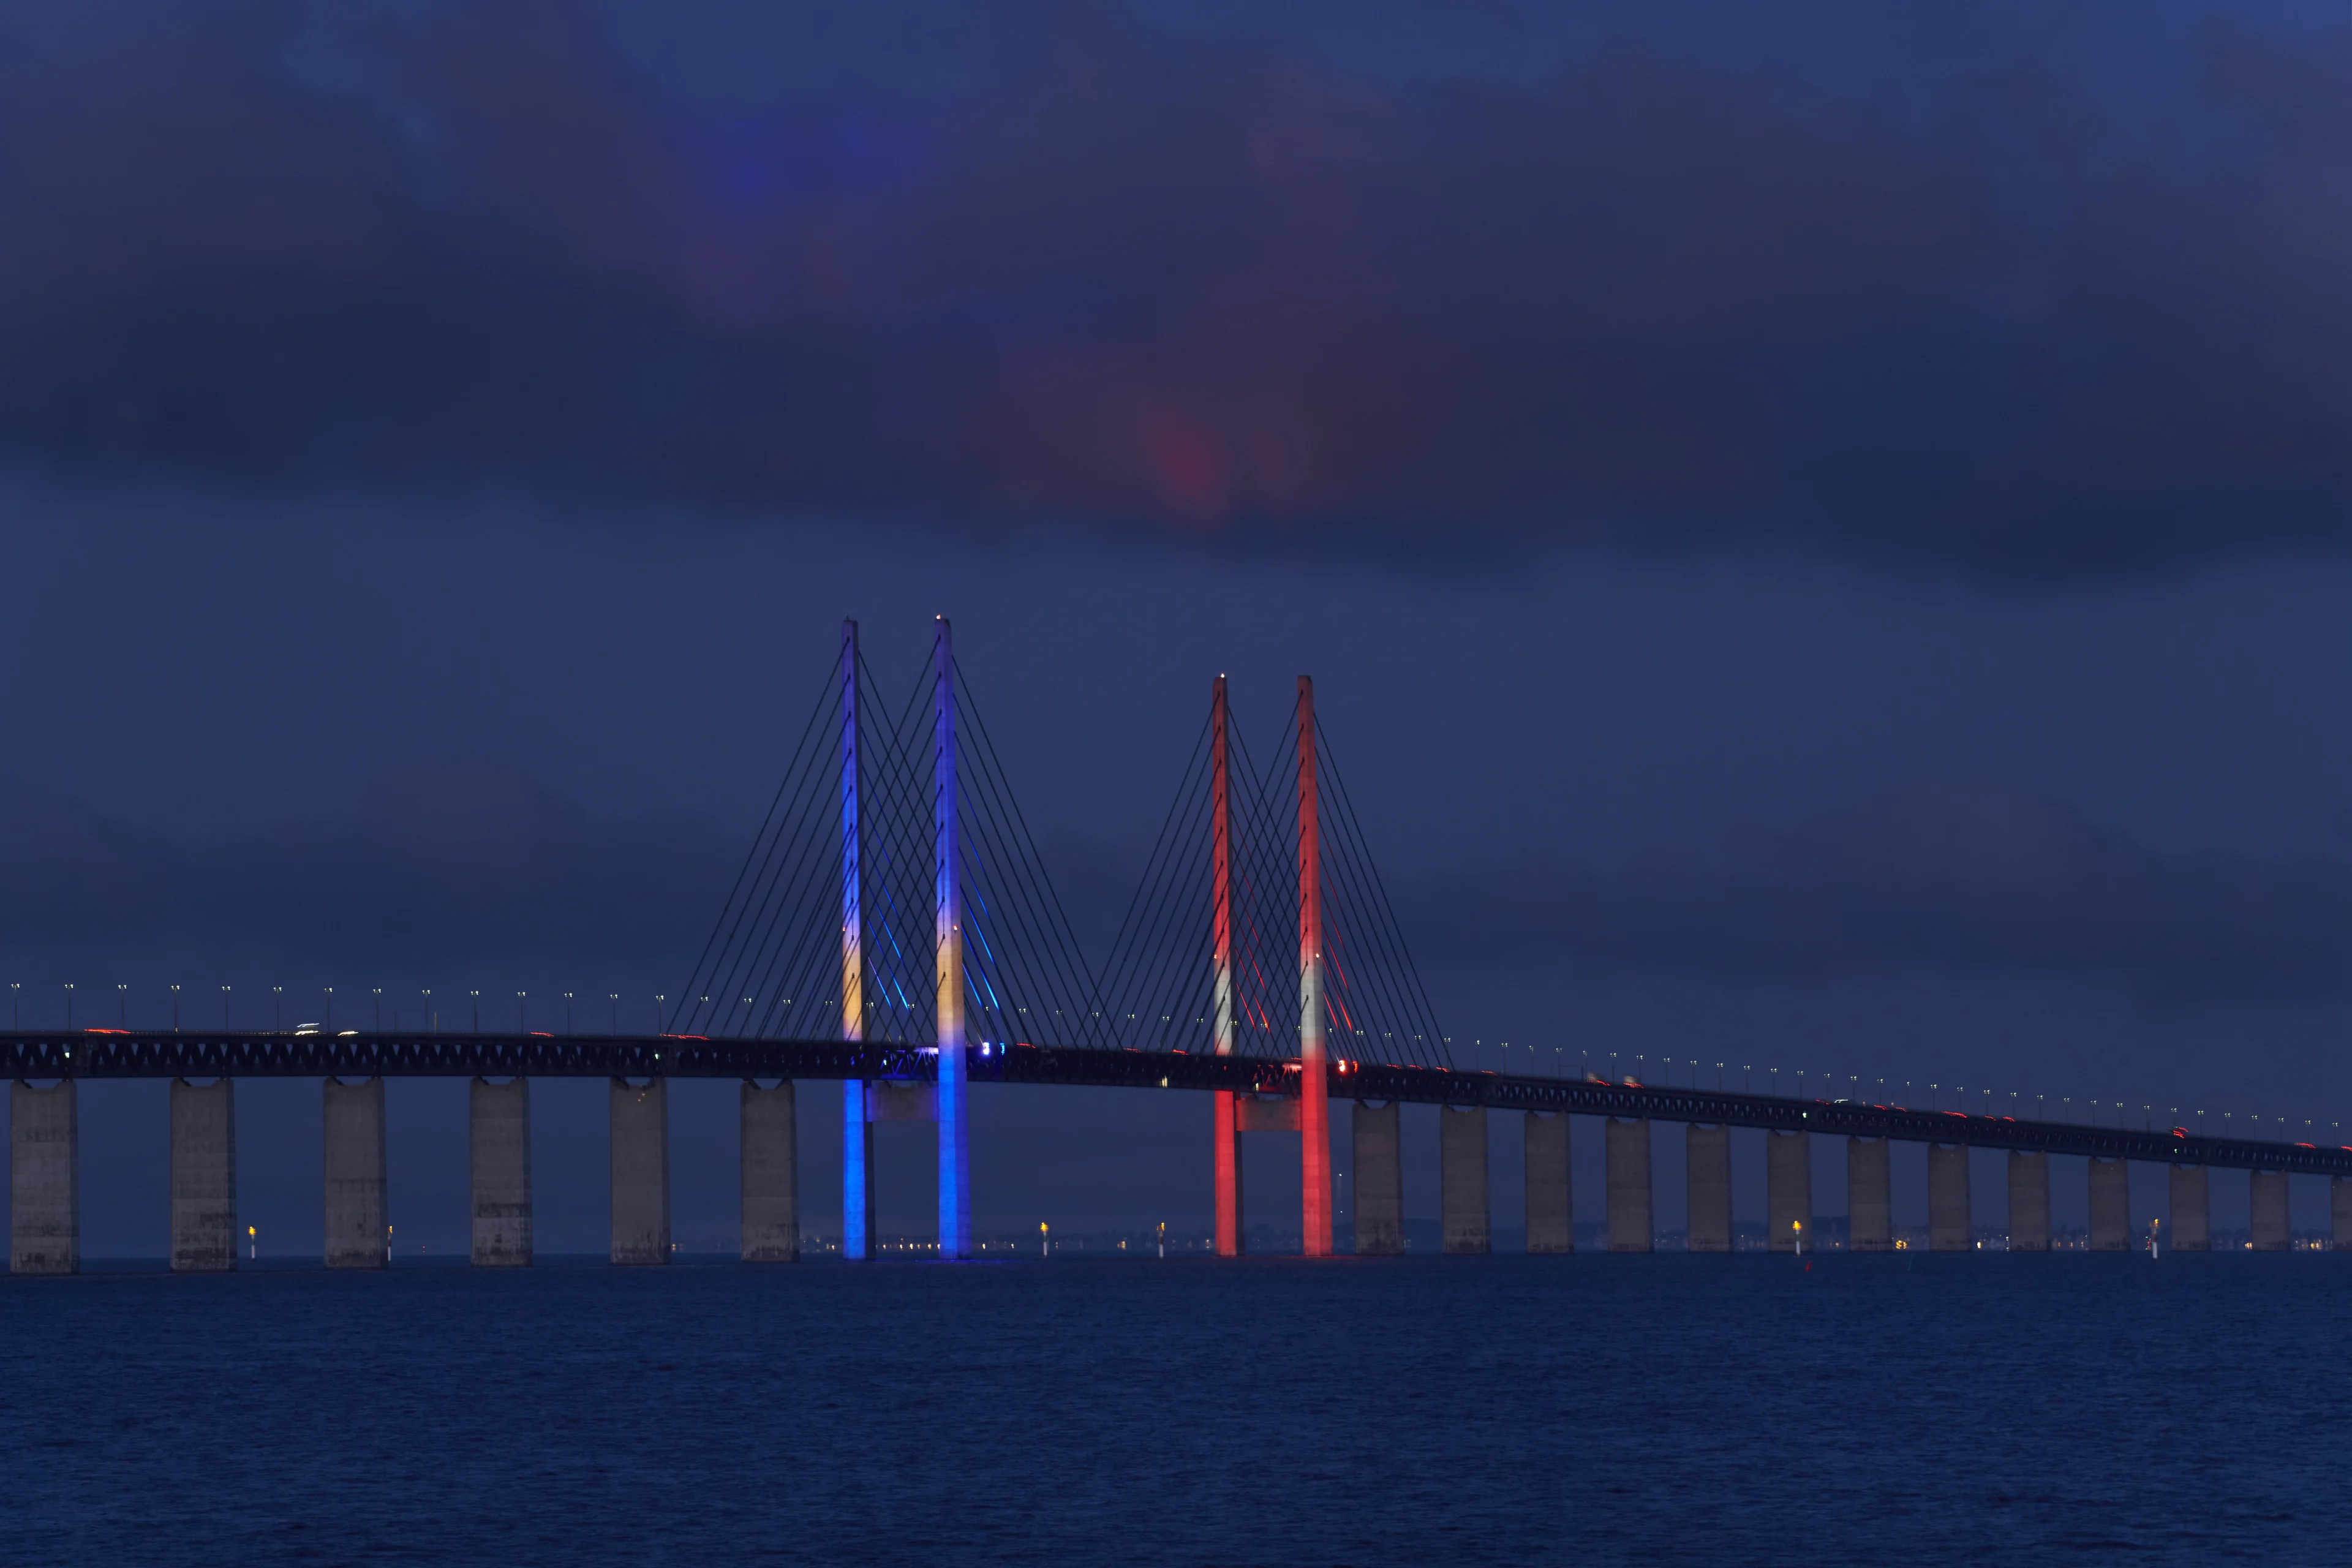 The Øresund bridge pylon lighting in the colors of the Swedish and Danish flags - blue, yellow, red and white.